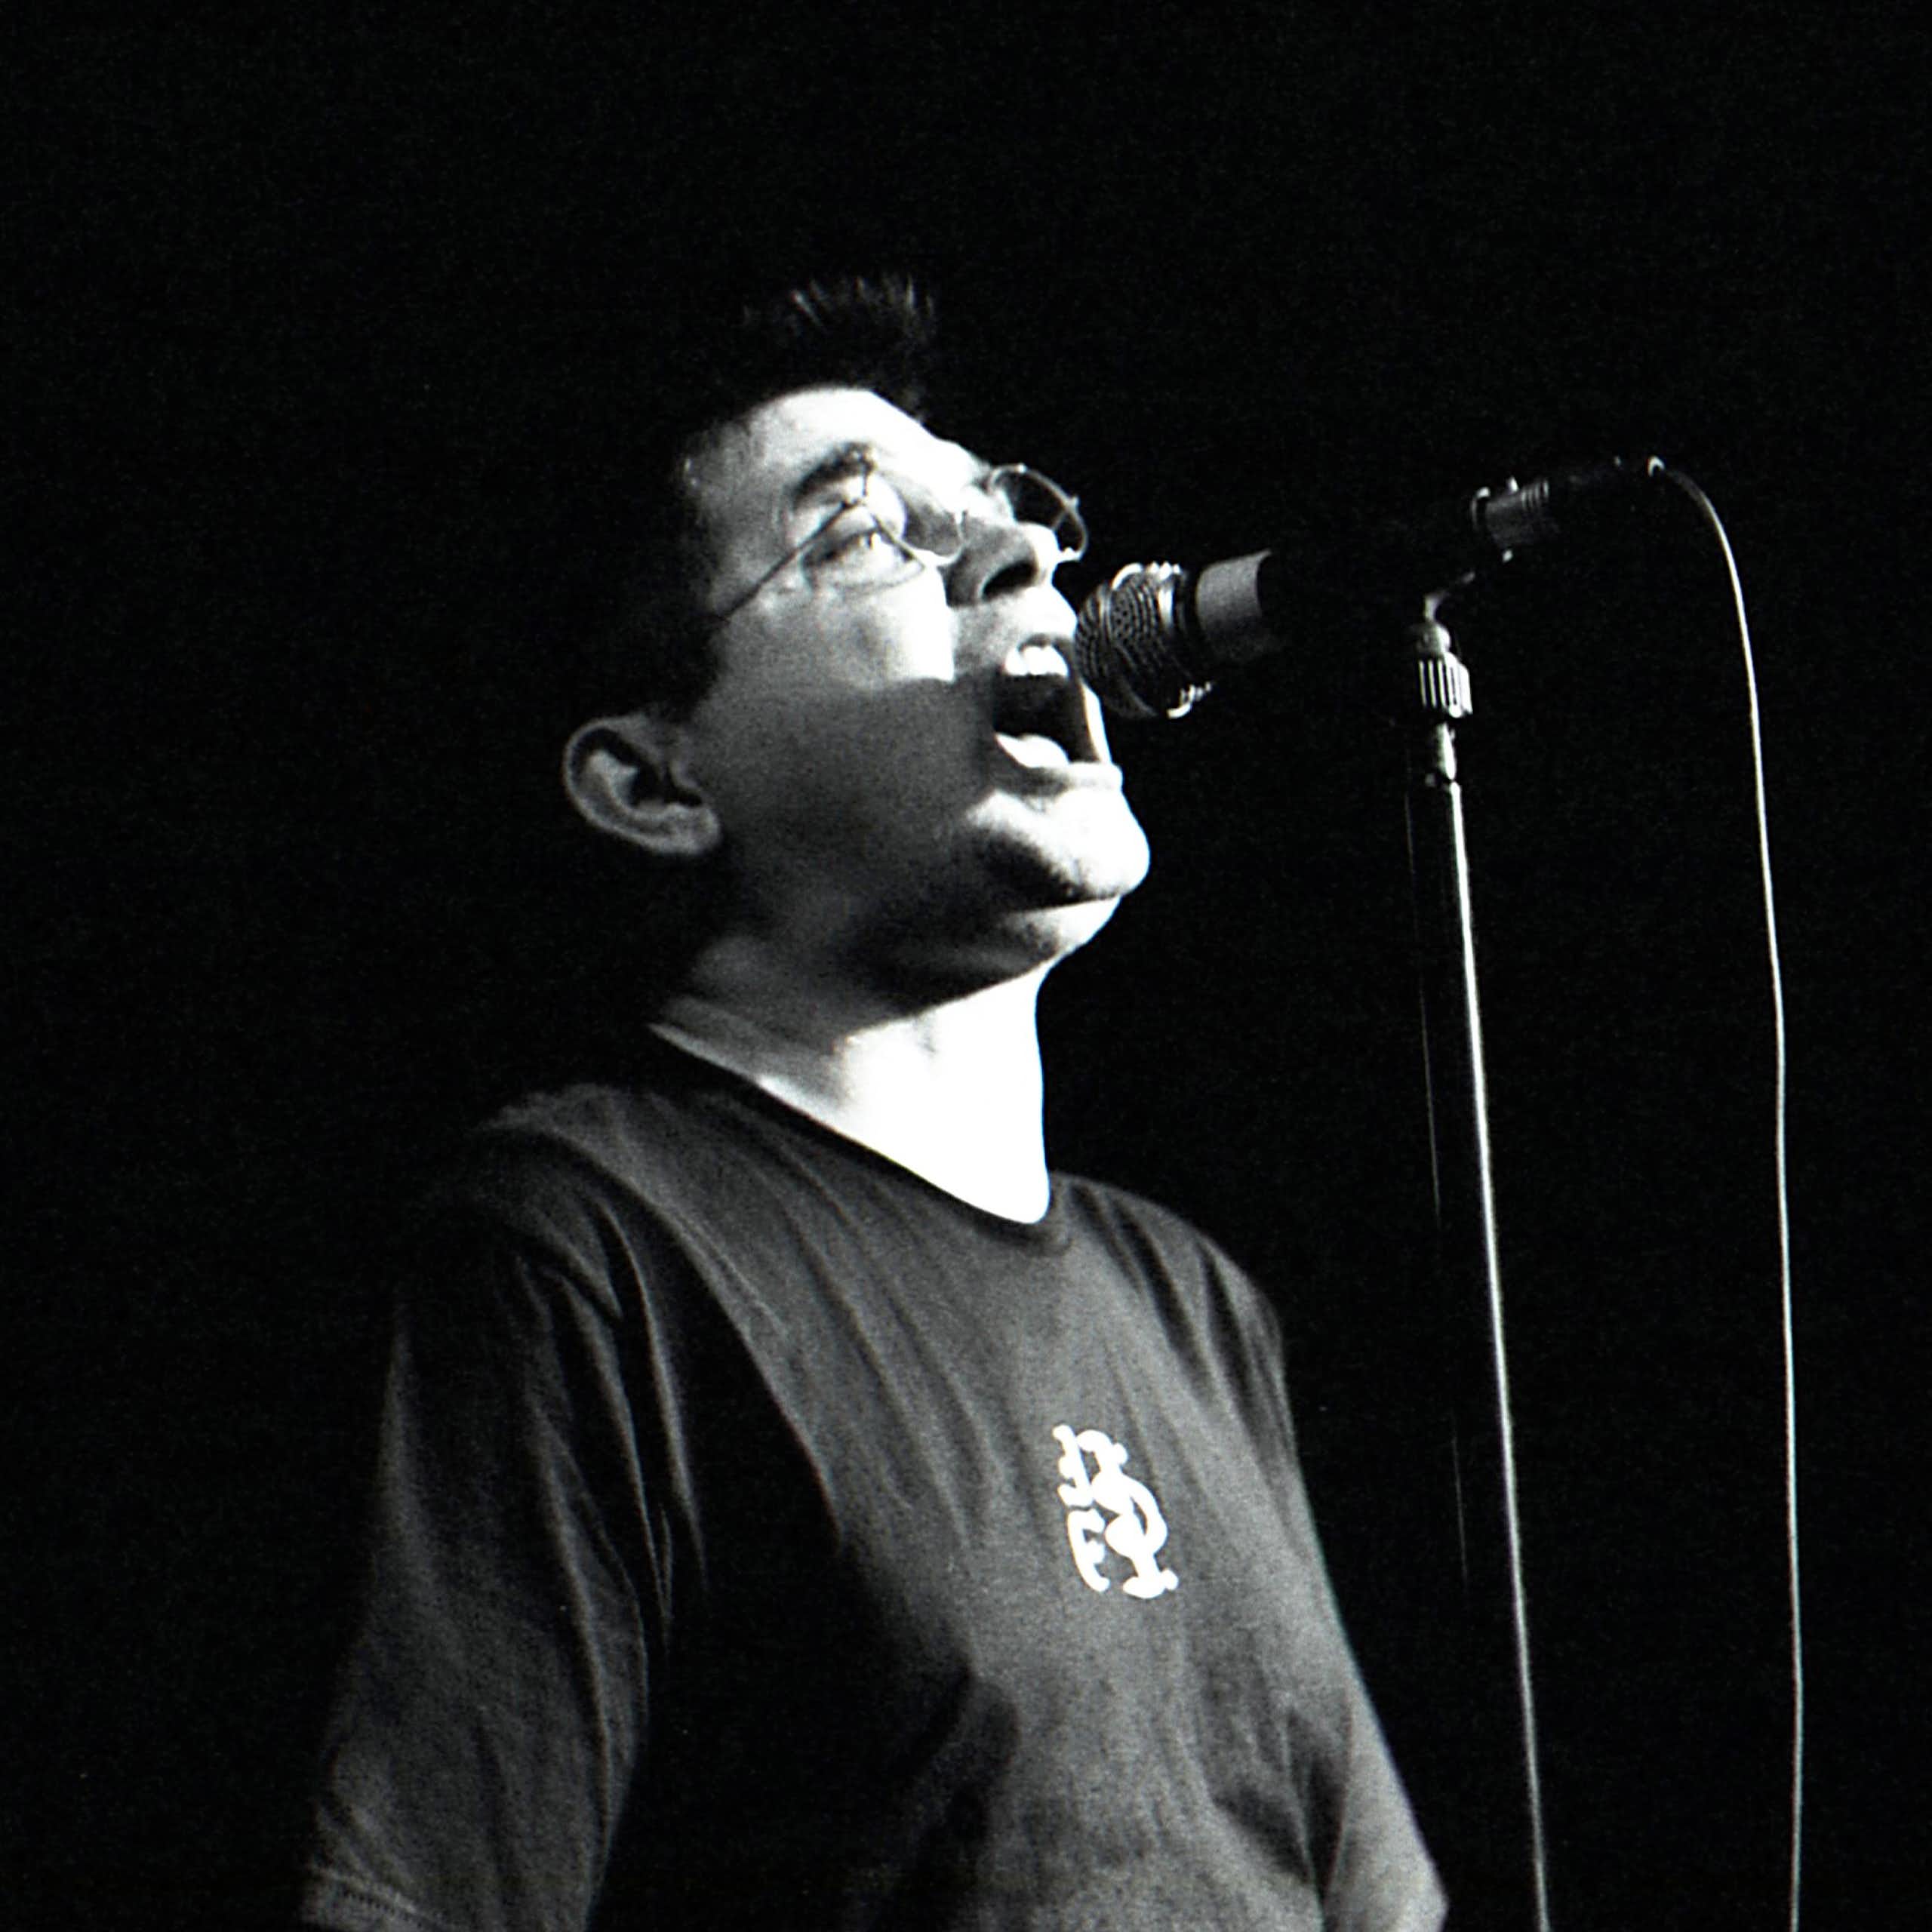 Black and white photo, Albini at a microphone